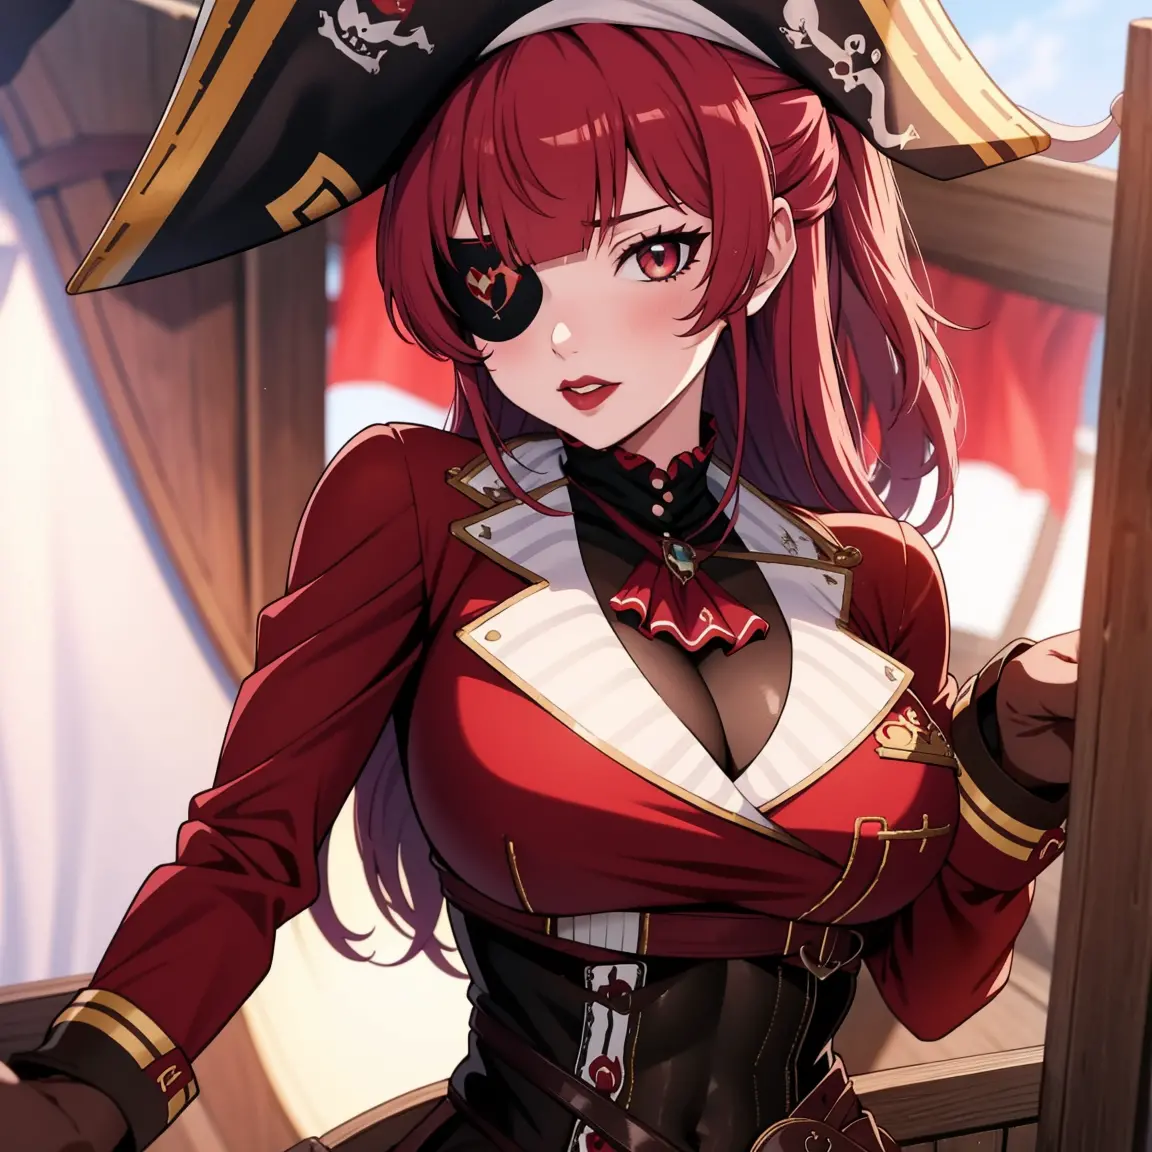 Anime image of a girl with red hair and eyes with red lipstick on her lips and wearing a sexy and very tight pirate outfit, as w...